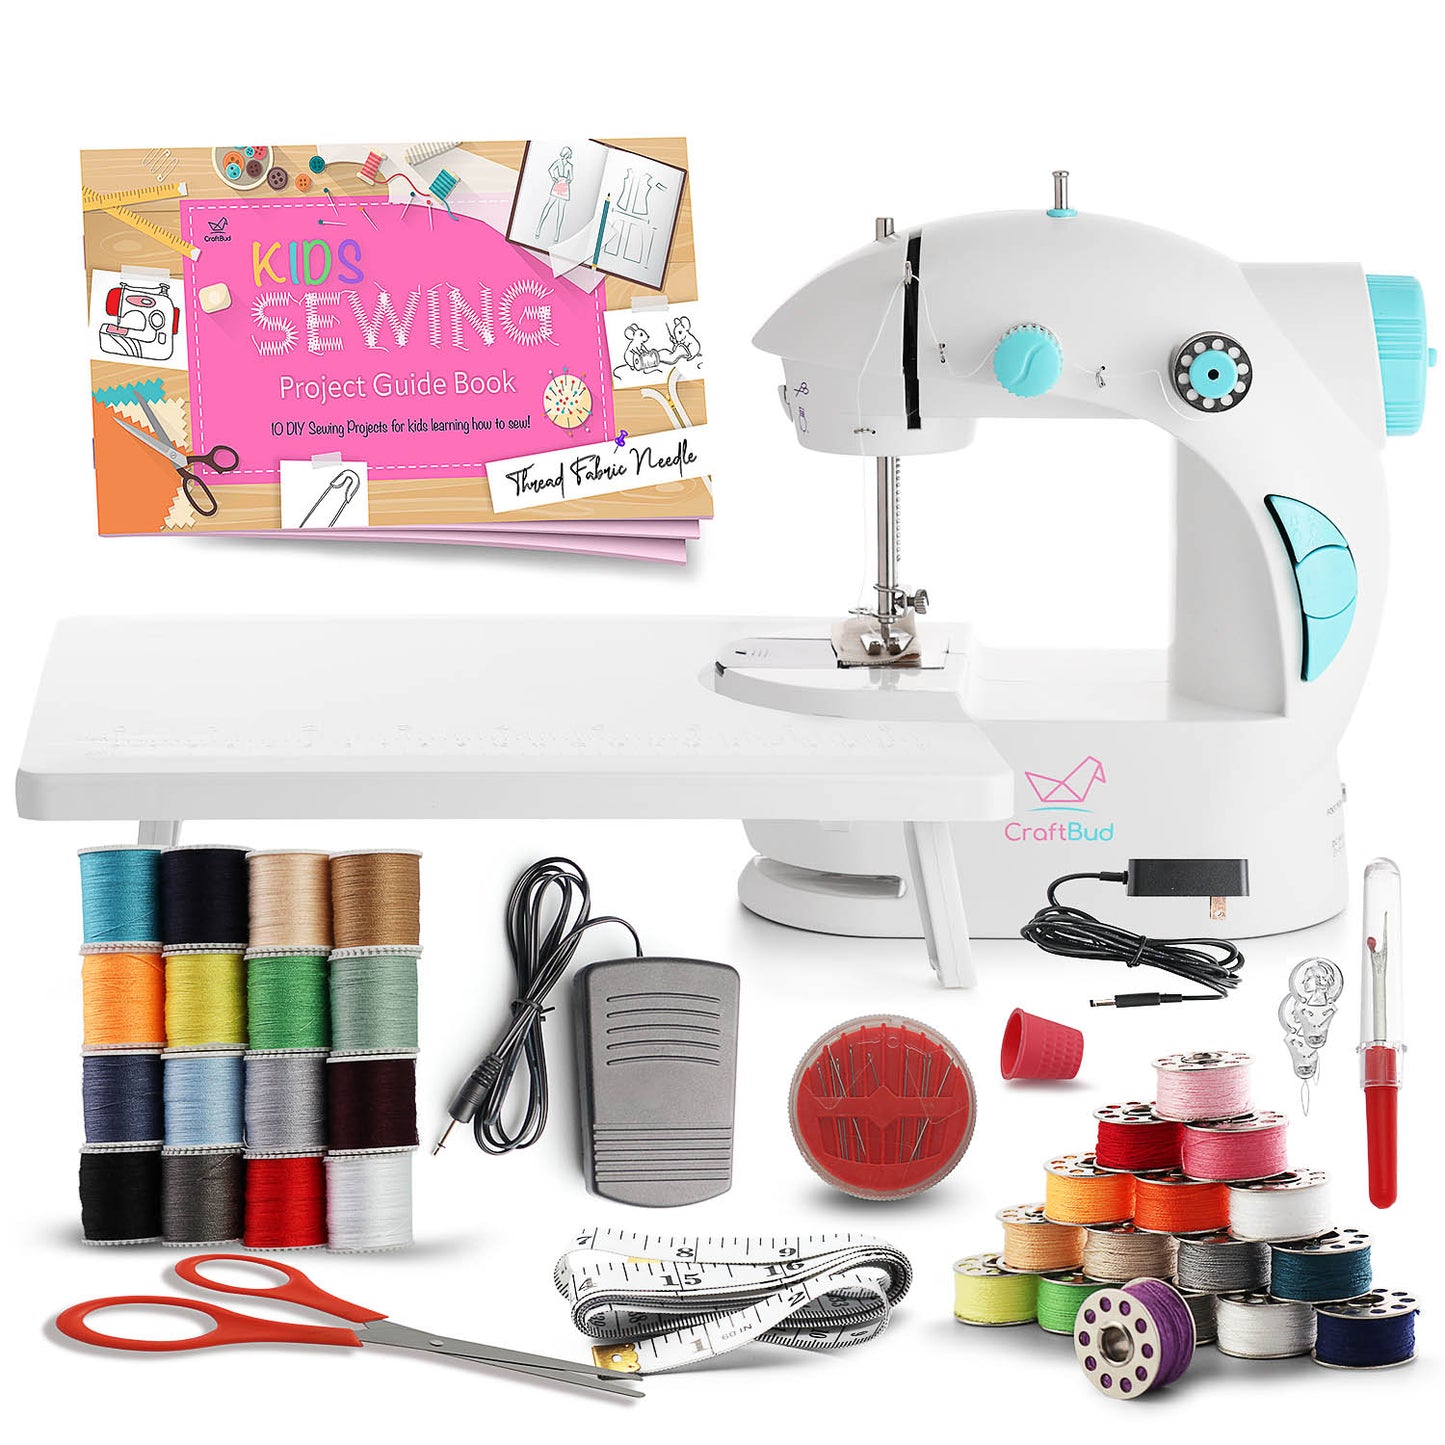 Sewing Kit for Kids, Beginners Sewing Kit